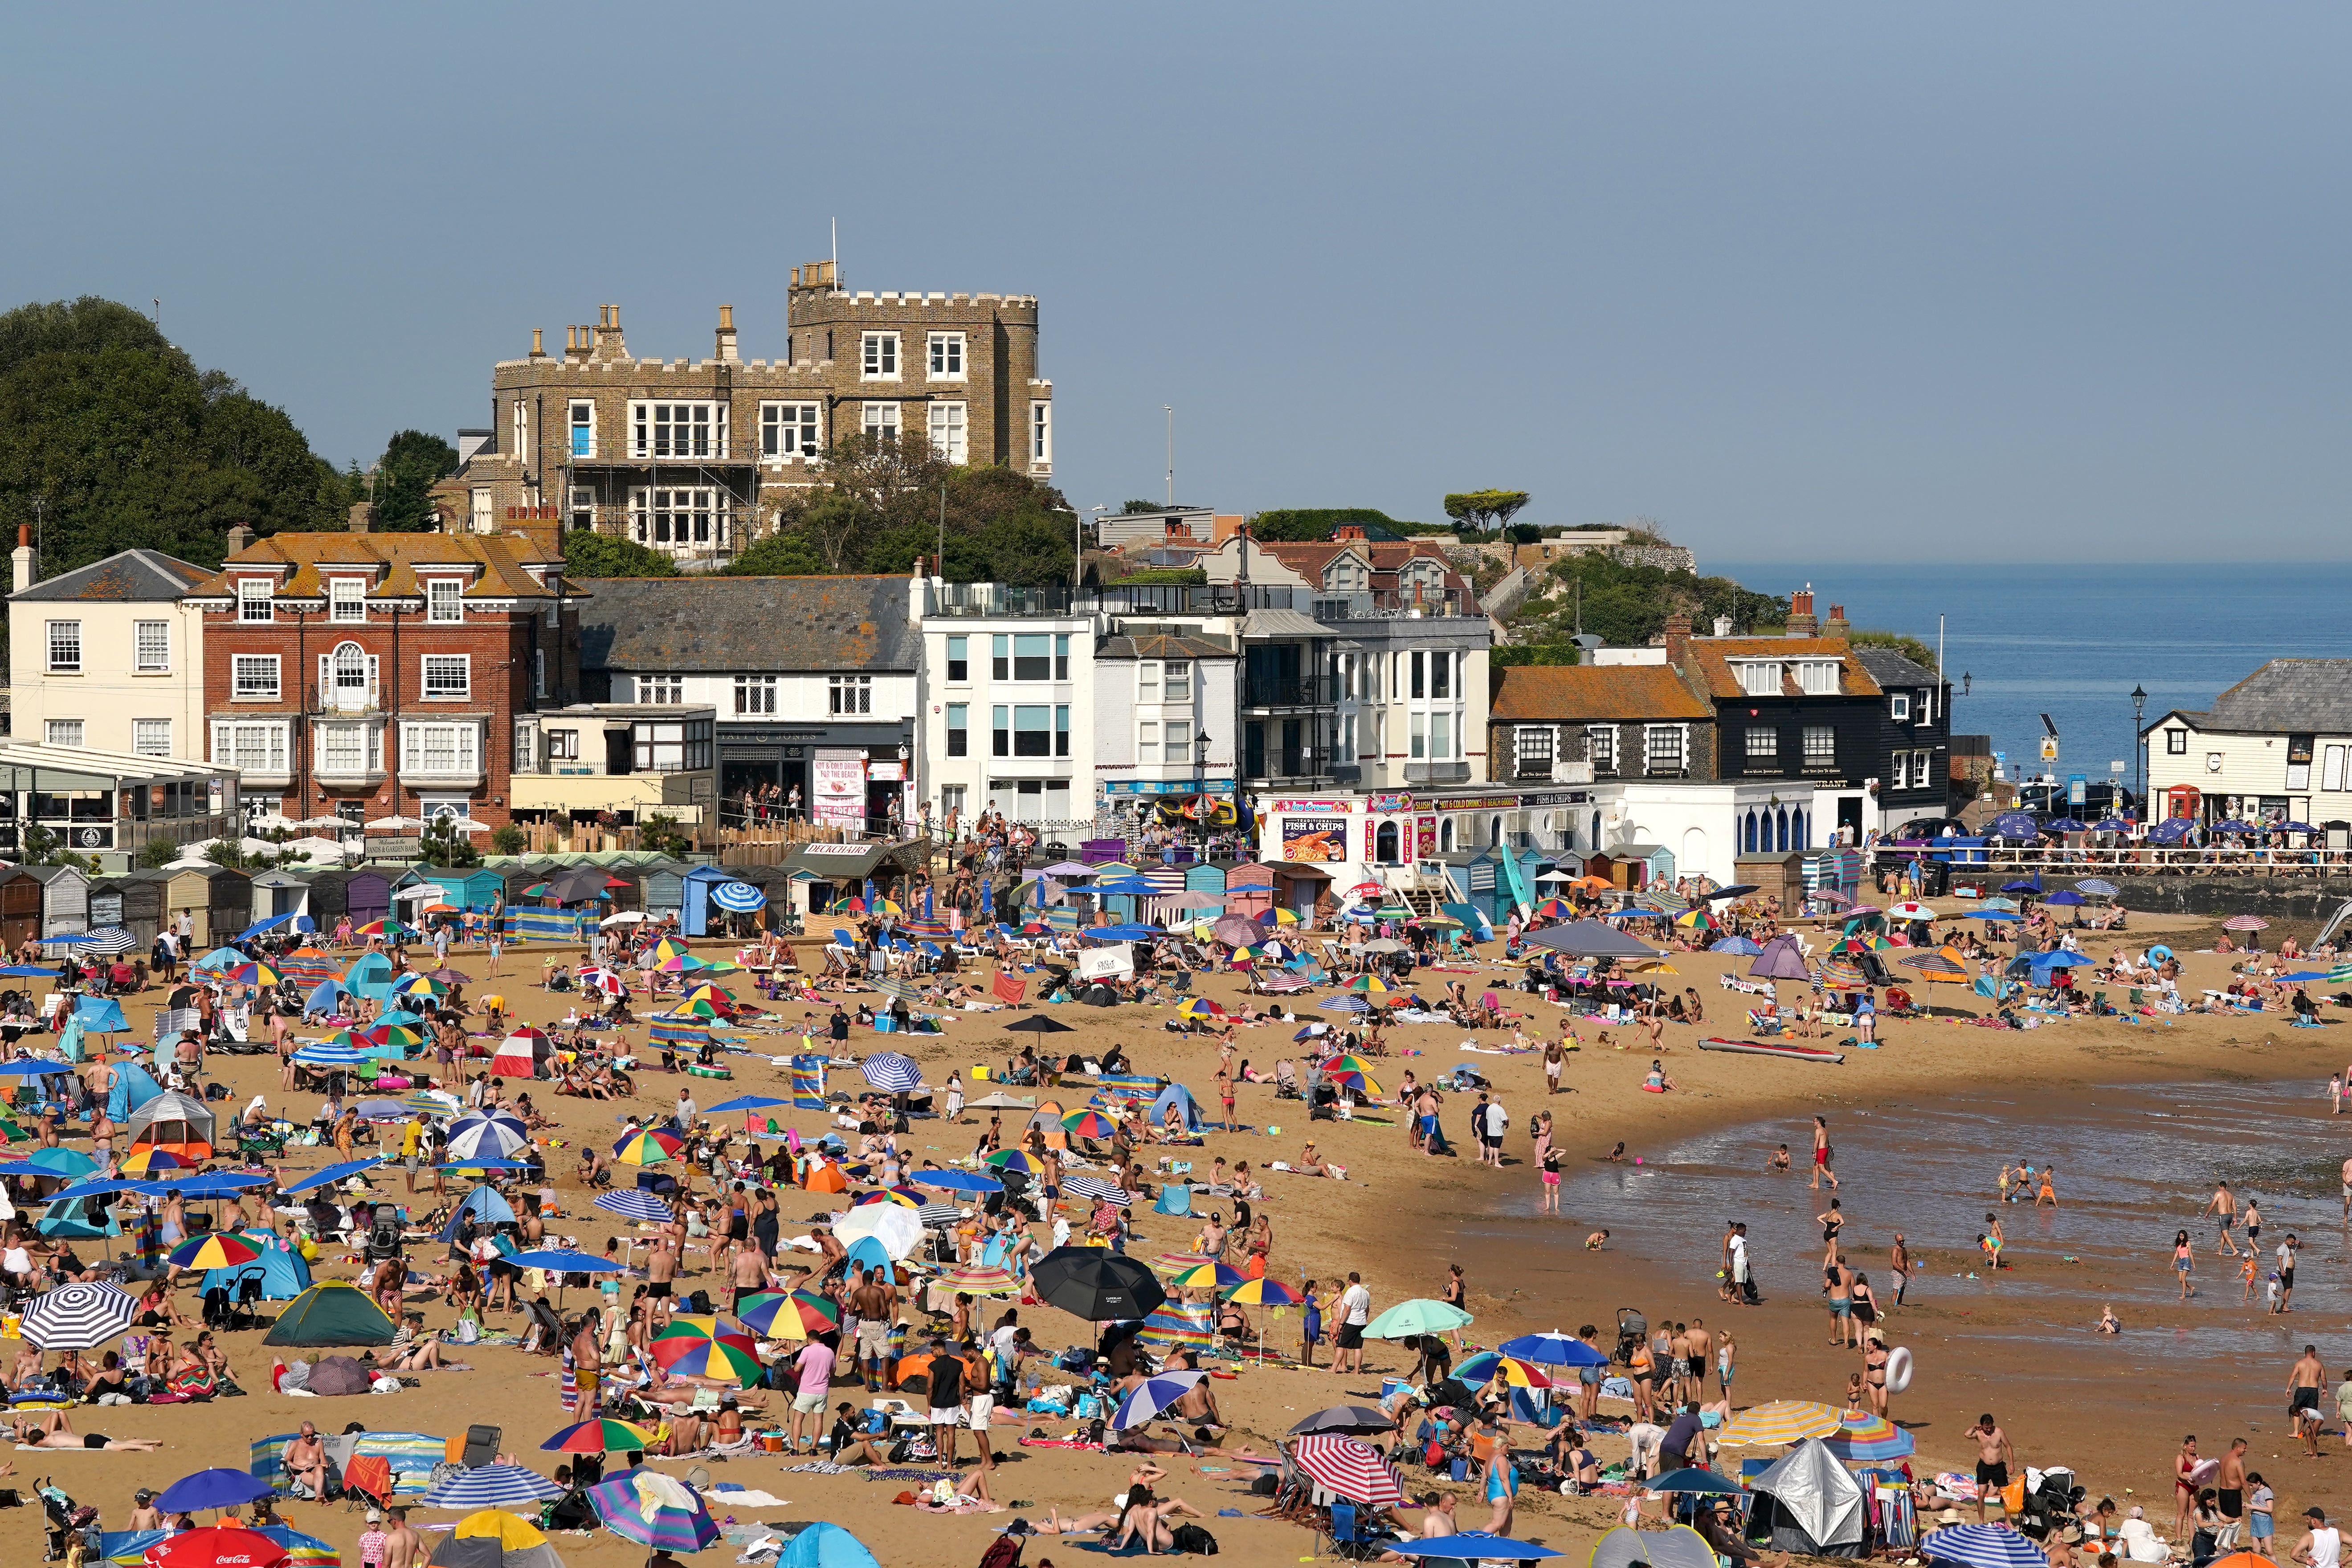 Temperatures are expected to reach highs of 30C next week, particularly in the South East